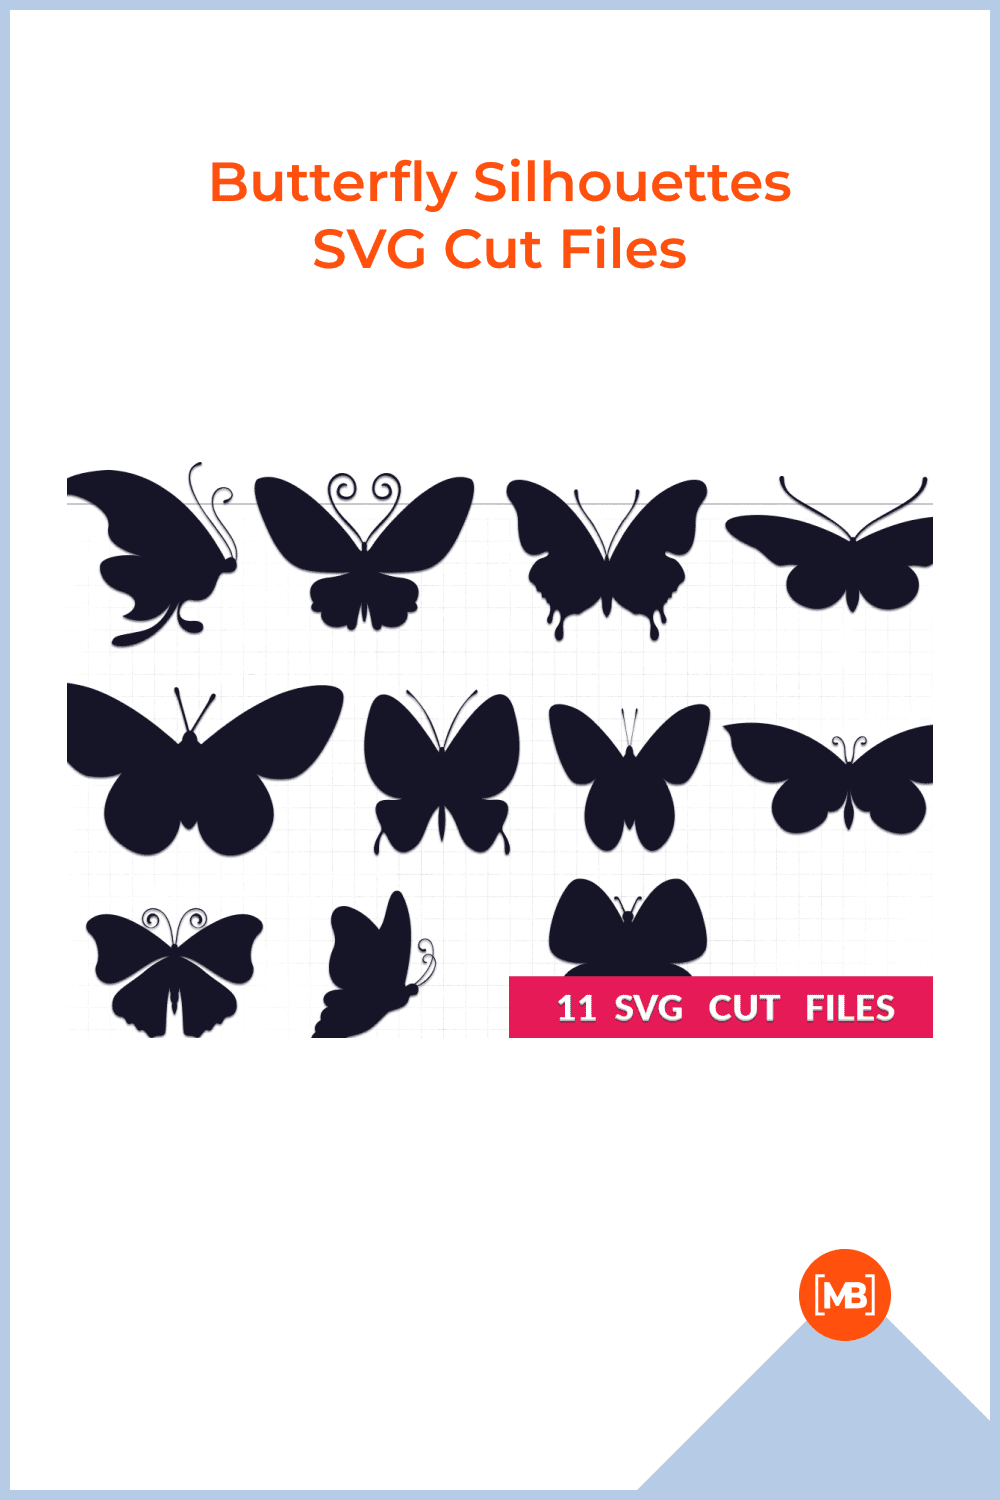 Butterfly Silhouettes SVG Cut Files.